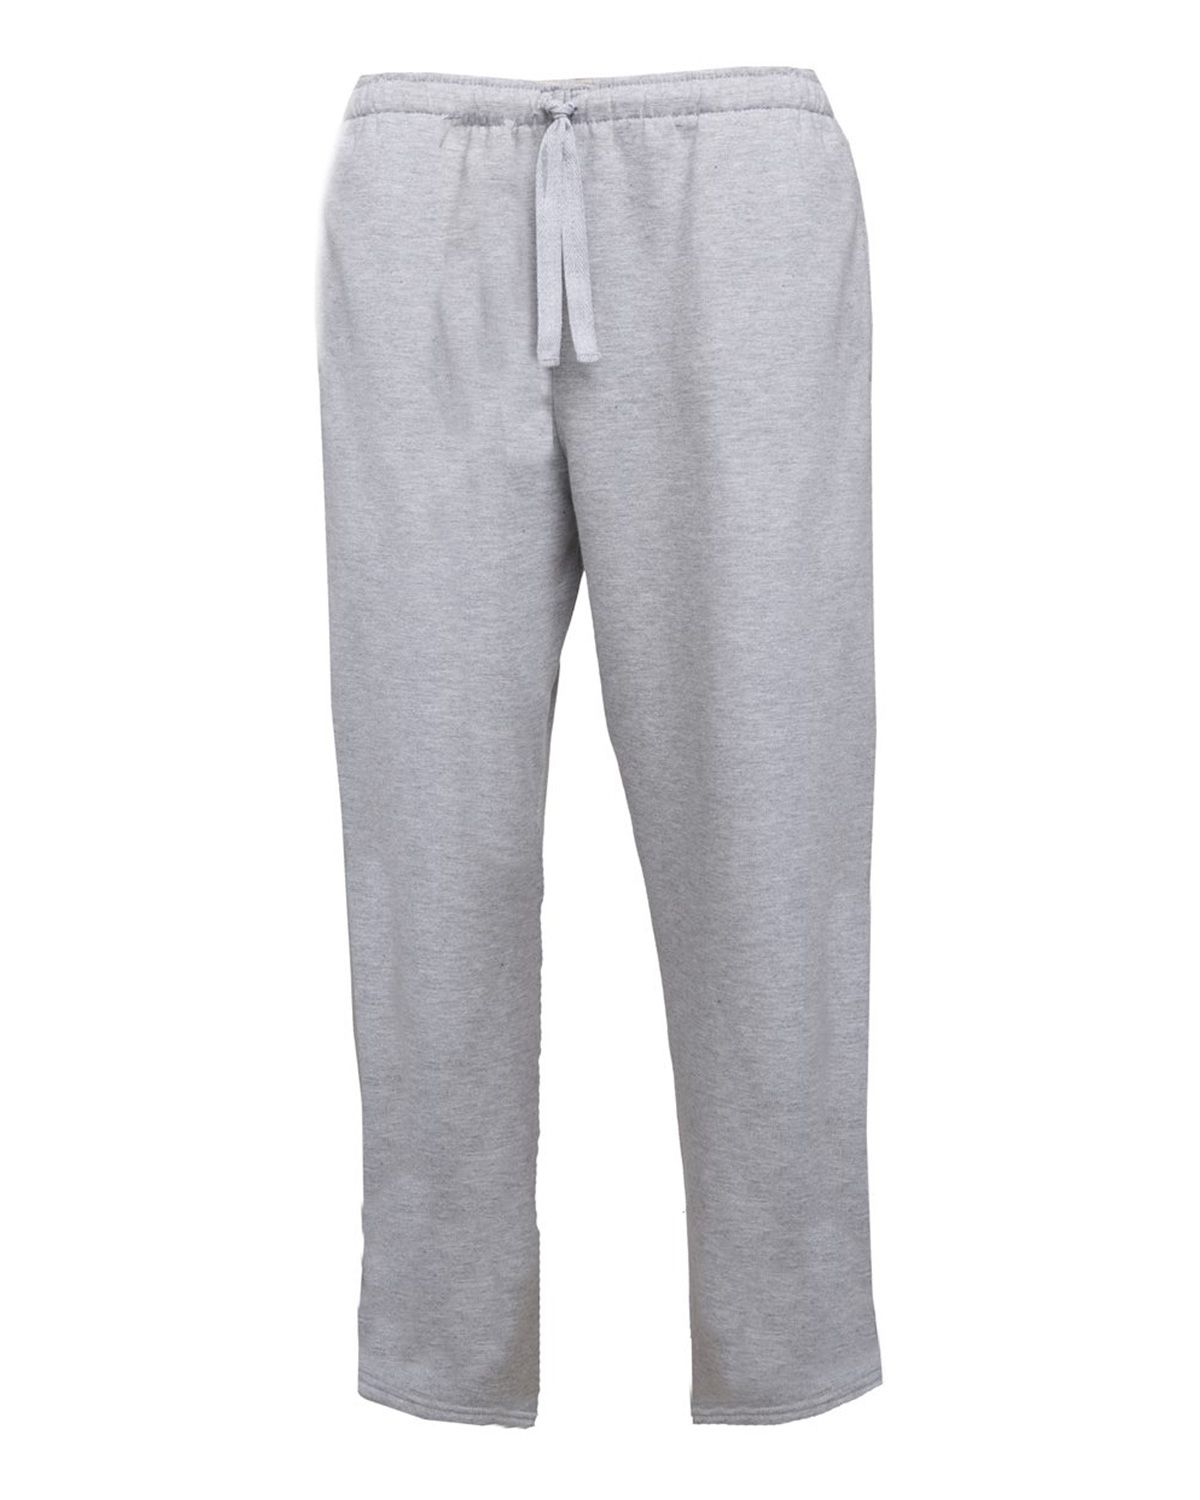 Boxercraft K18 MVP Fleece Pants with Pockets - Free Shipping Available